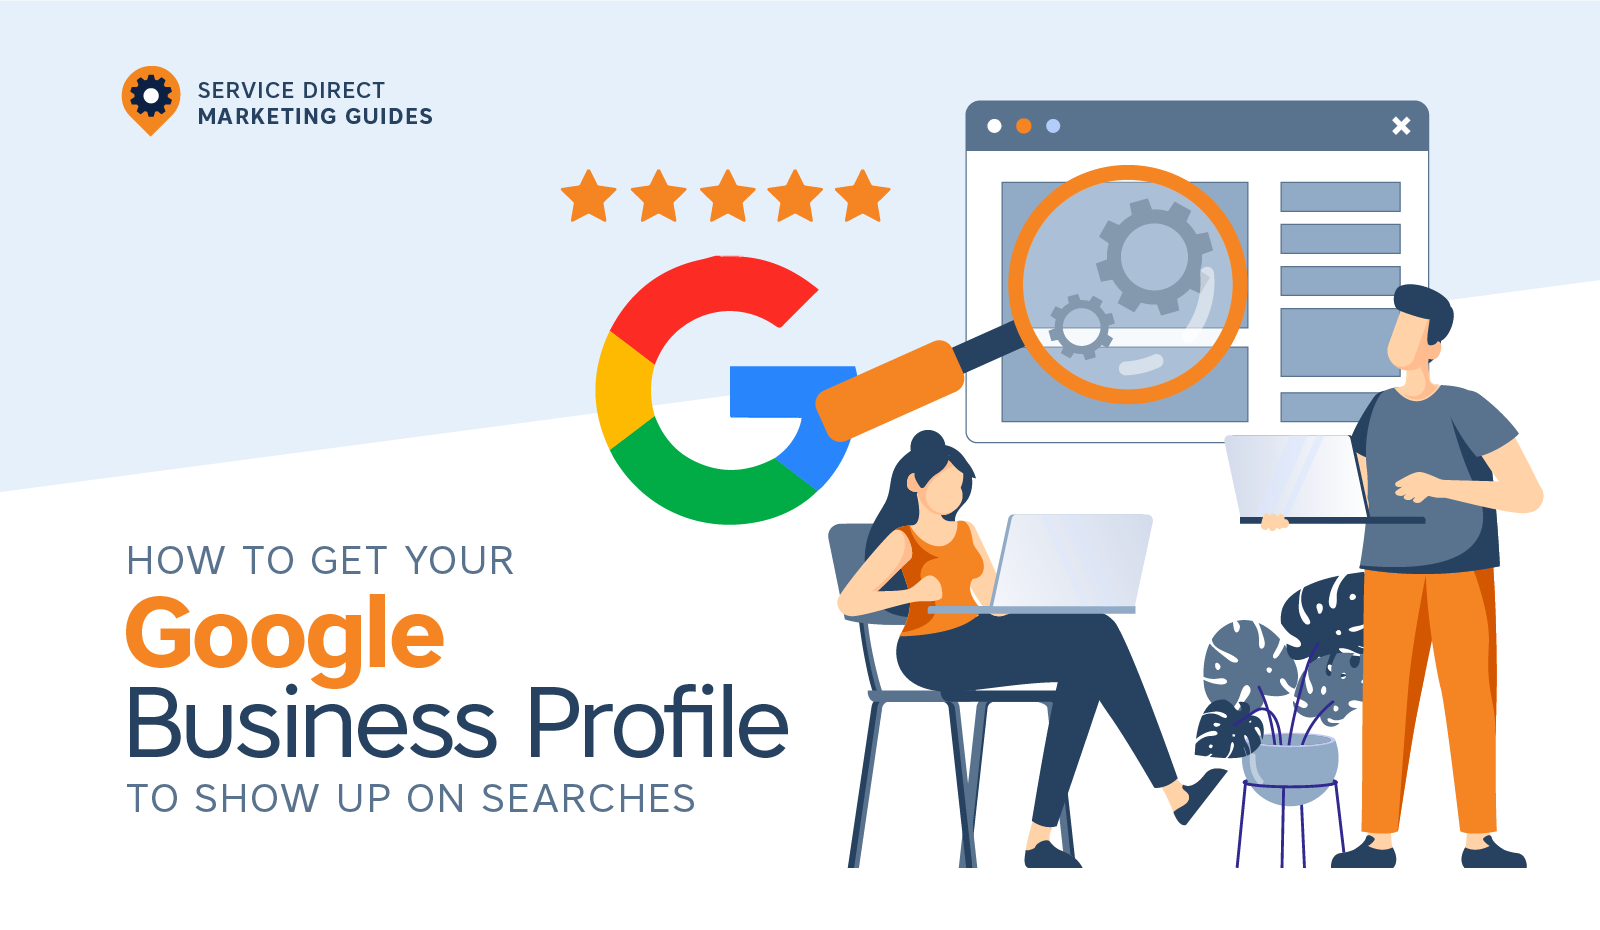 How to Get Your Google Business Profile to Show Up on Searches